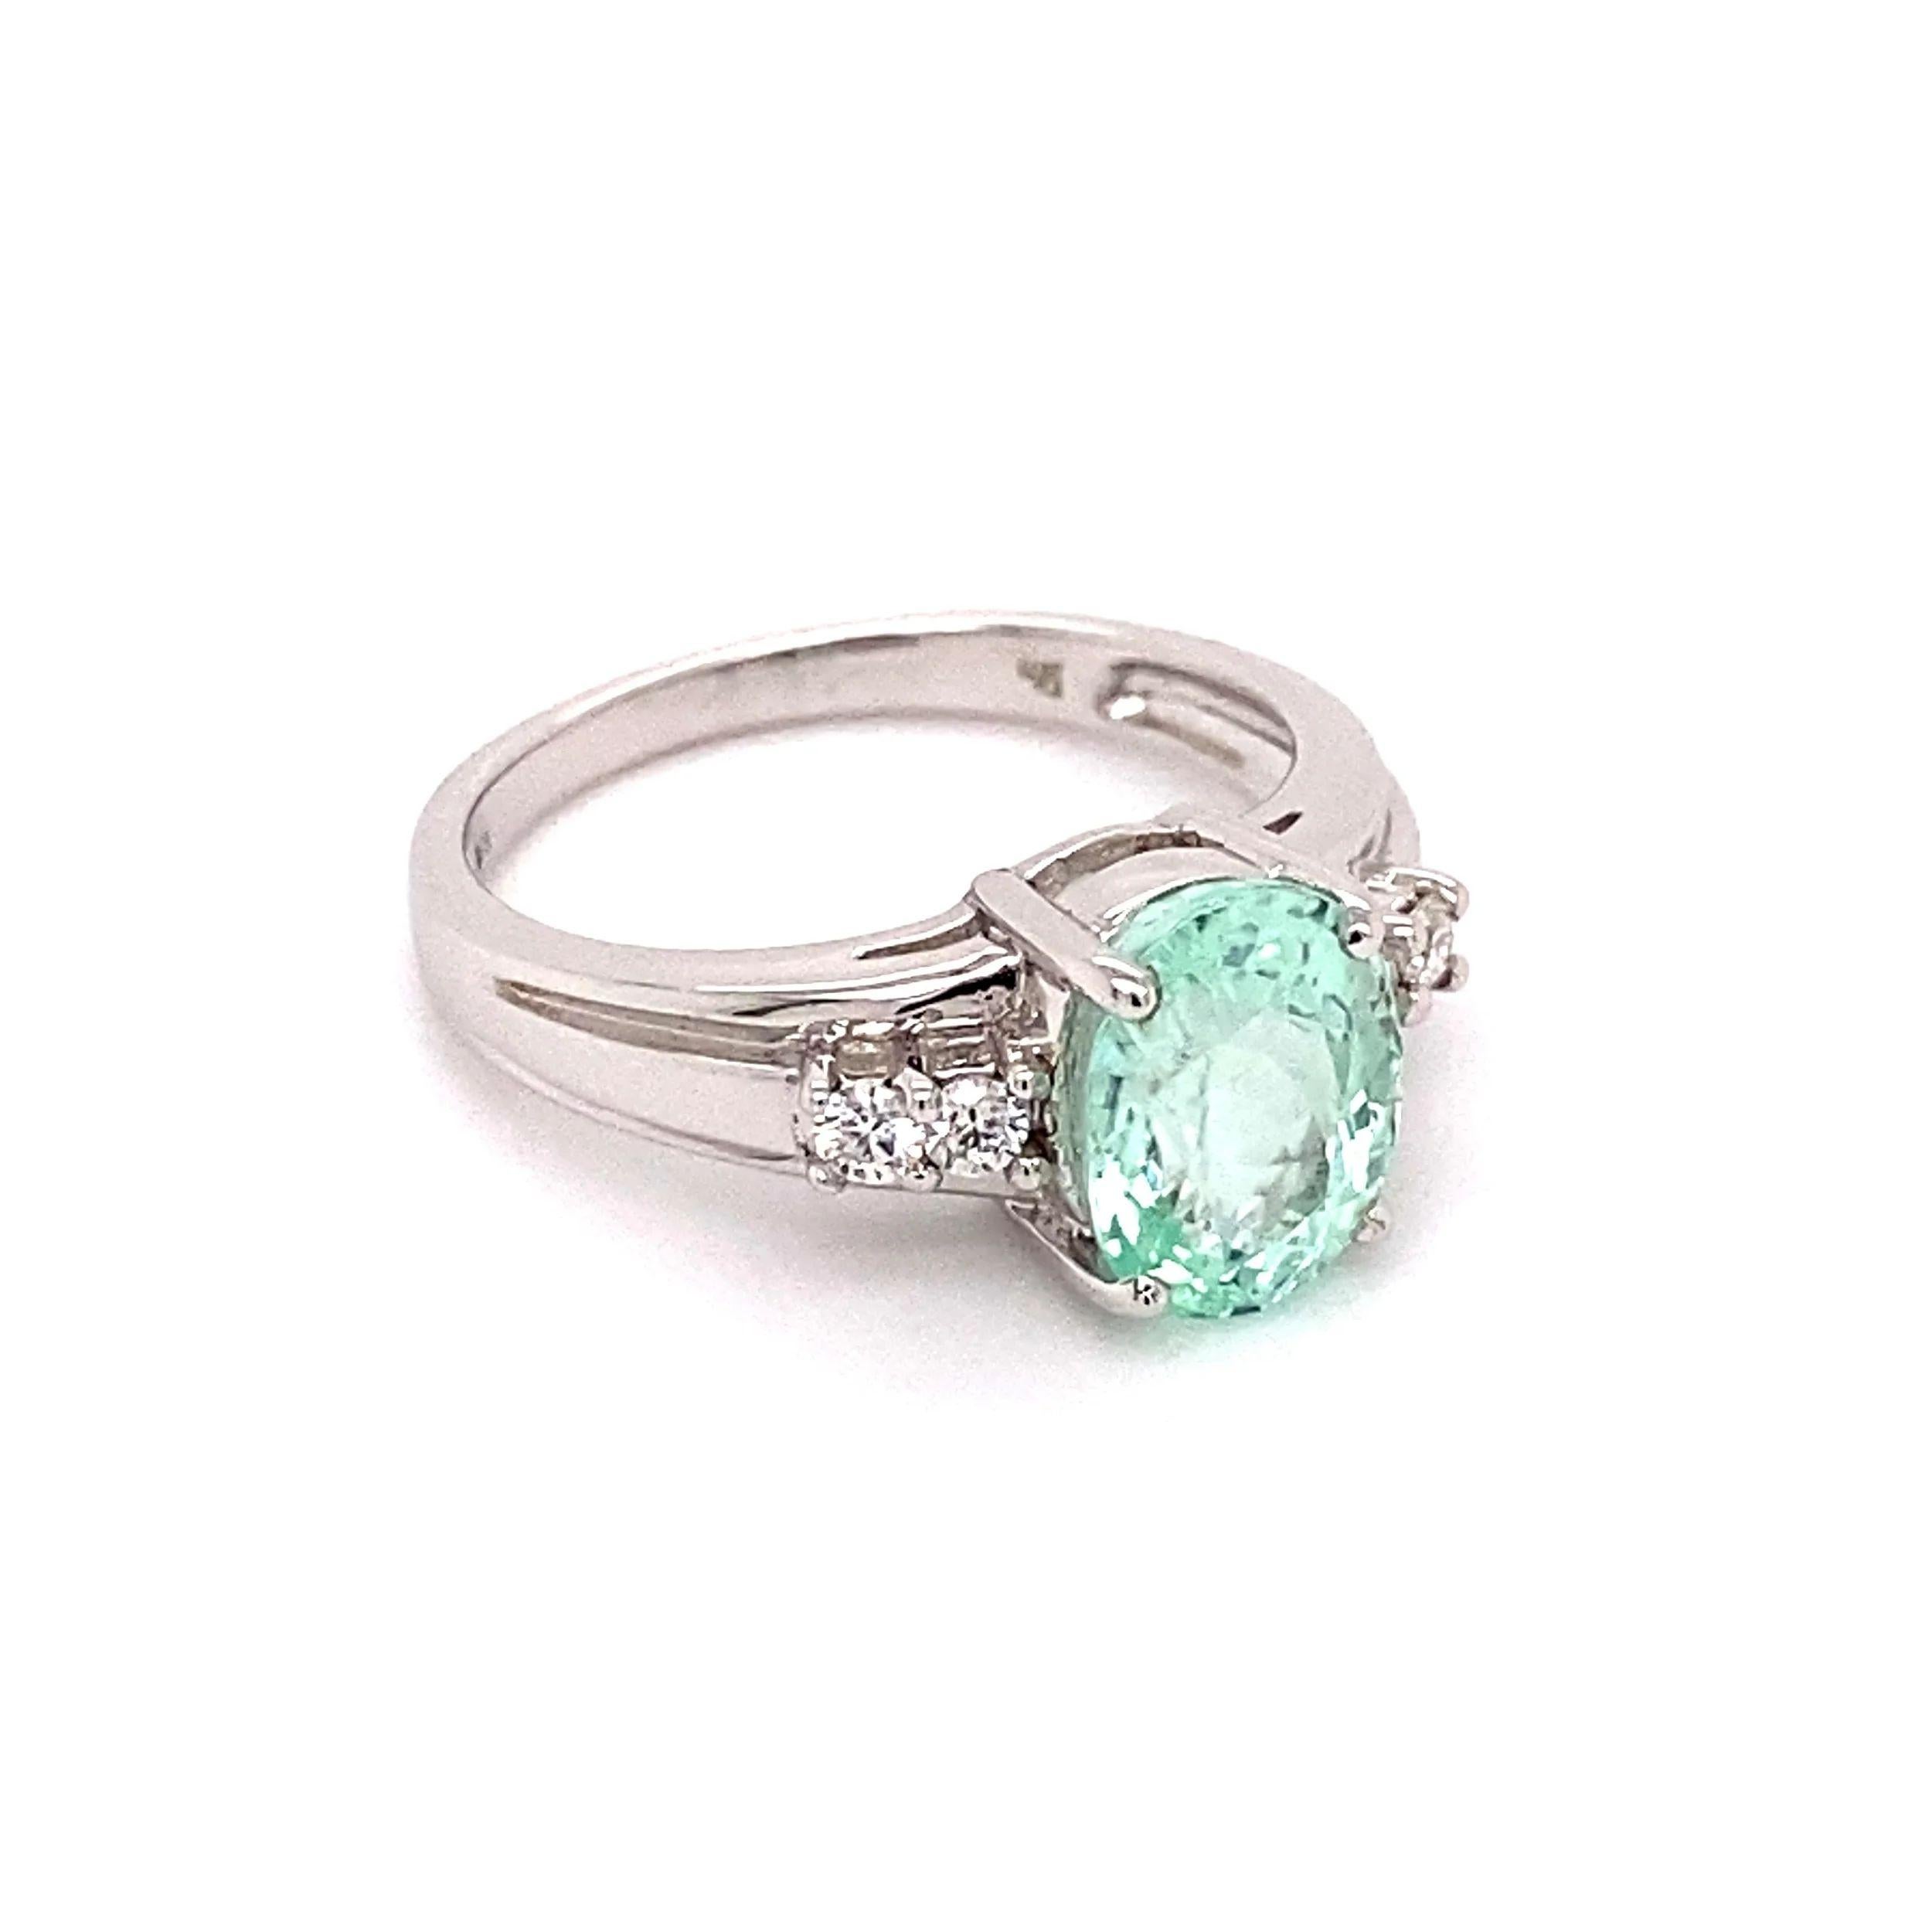 Simply Beautiful! Finely detailed GIA Oval Bluish Green Paraiba Tourmaline and Diamond Gold Ring. Either side set with Diamonds, approx. 0.18 total carat weight. Dimensions 1.00” l x 0.81” w x 0.35” h. Hand crafted in 14K White Gold. The Paraiba